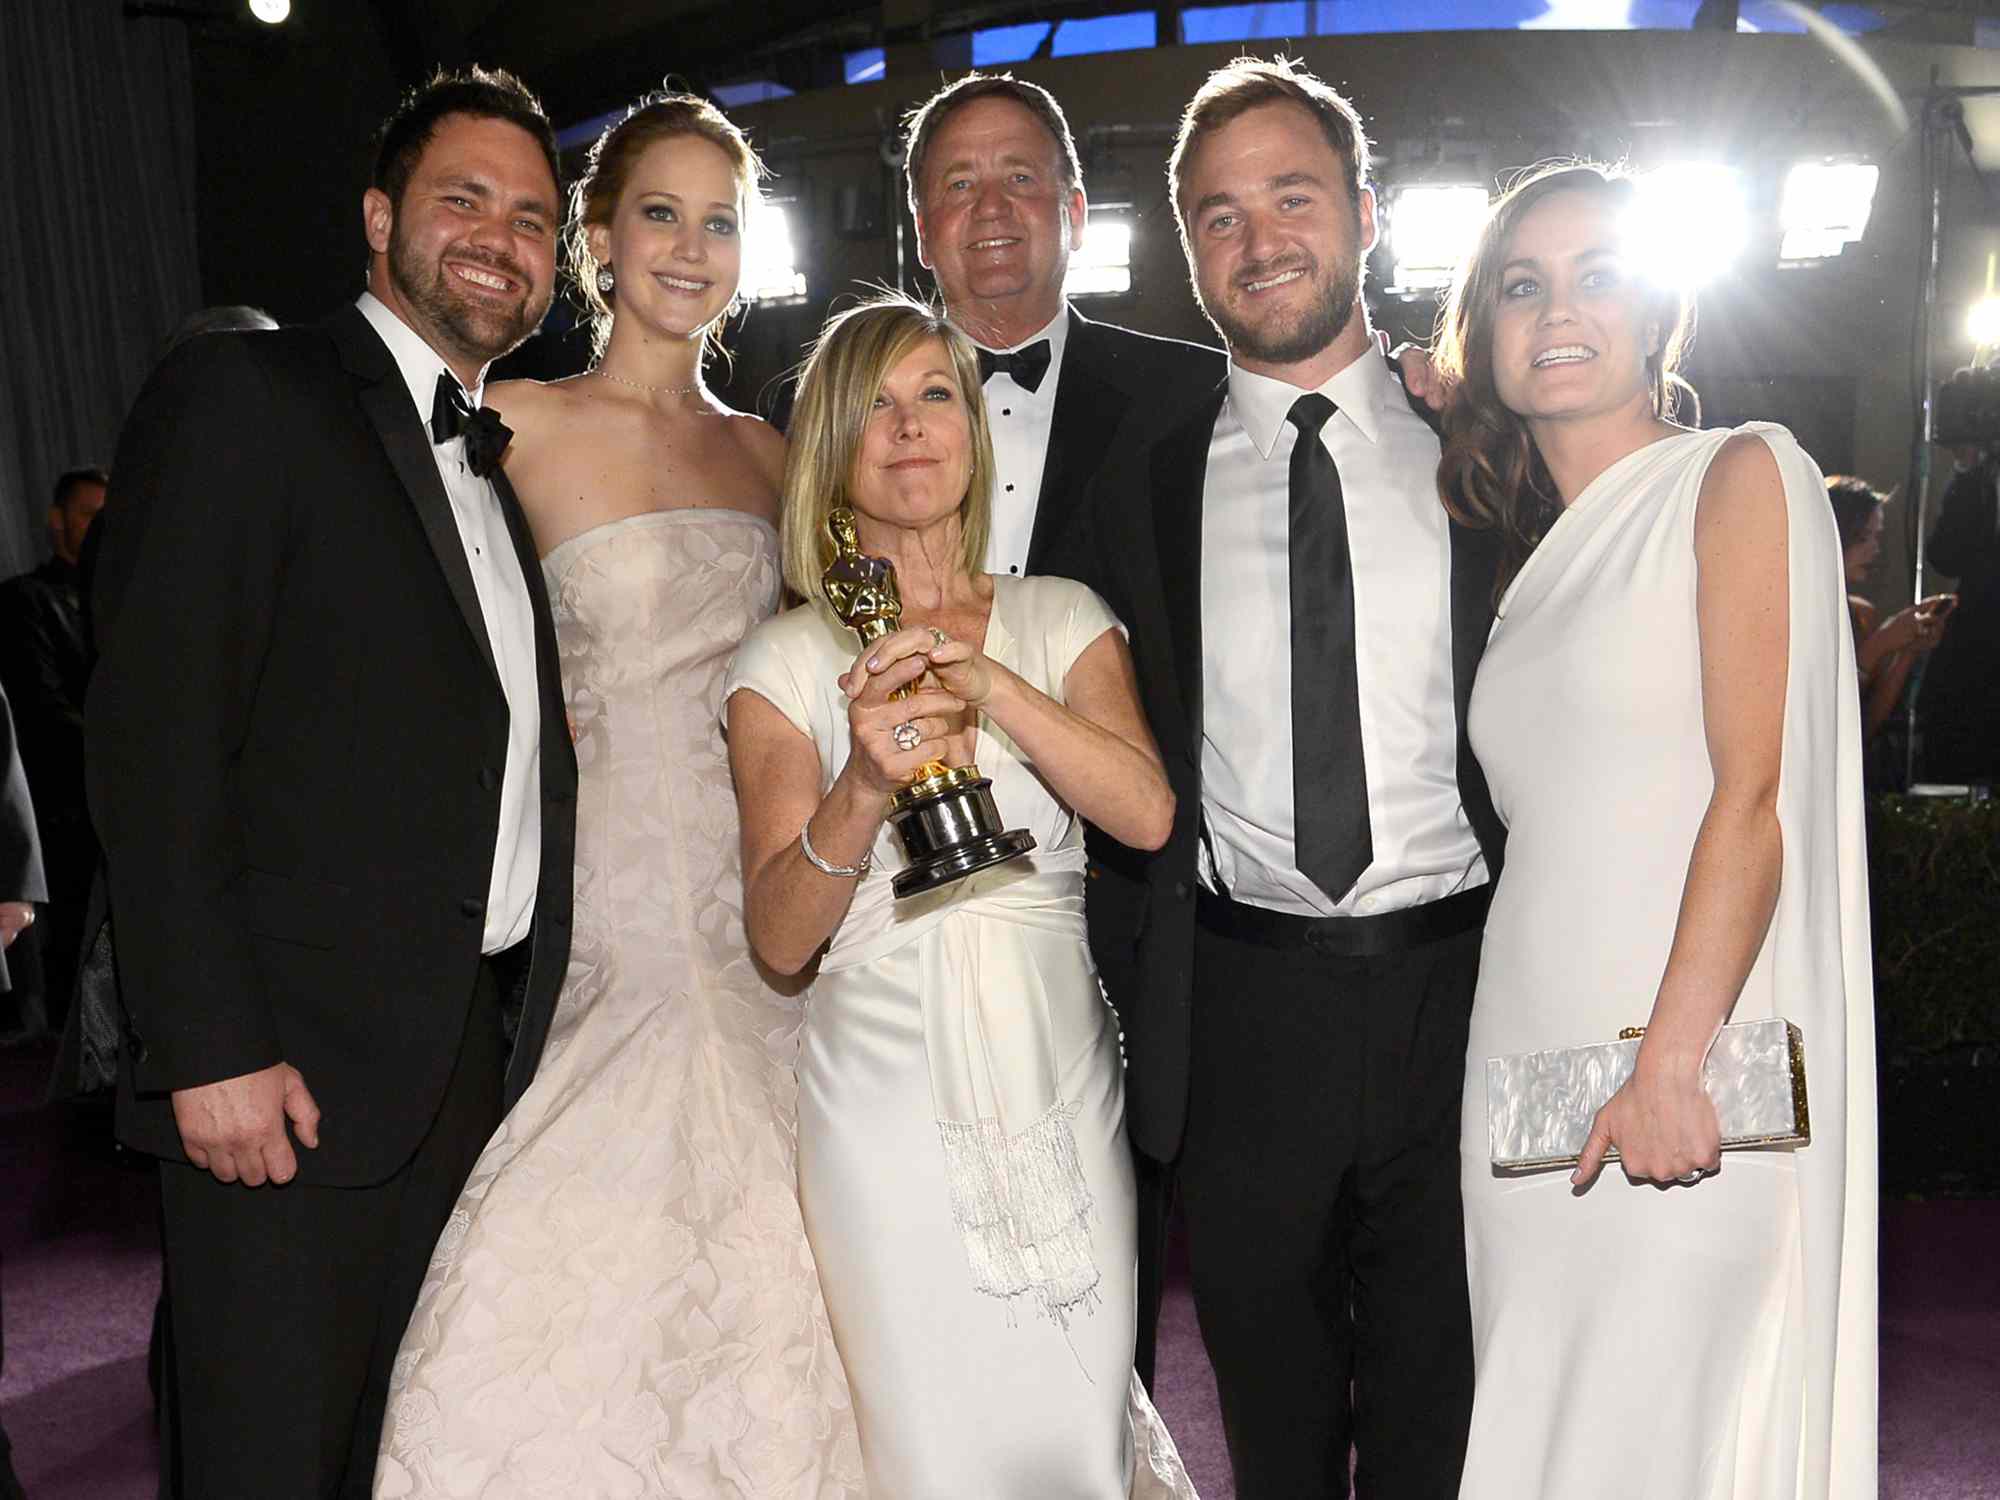 Jennifer Lawrence with her parents, Karen Lawrence and Gary Lawrence, and brothers, Ben Lawrence and Blaine Lawrence, at the Oscars Governors Ball in 2013.